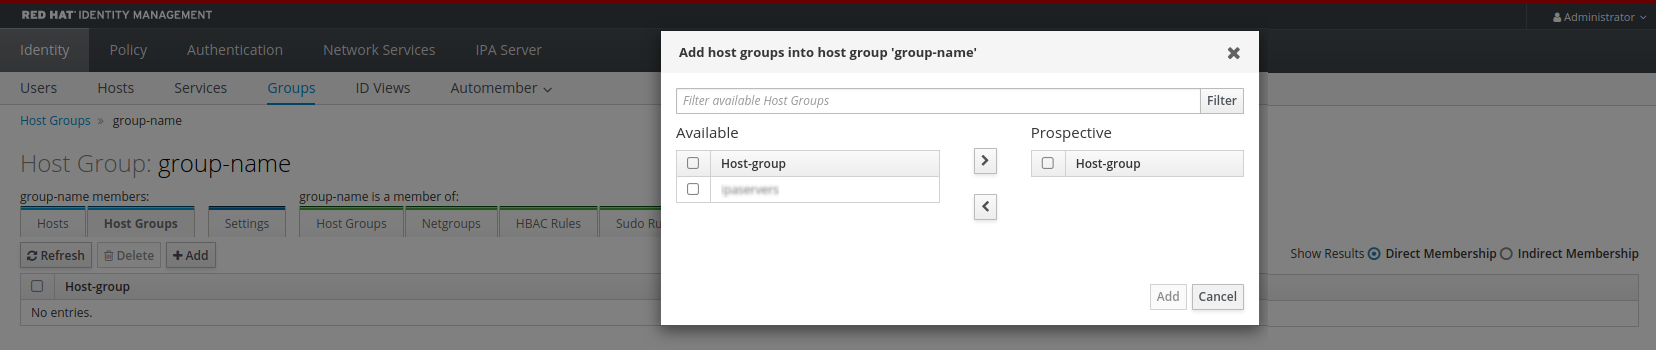 Screenshot of the "Add host groups into host group group-name" pop-up window which lets you select from "Available host groups" on the left to add to a "Prospective" list on the right. There is an "Add" button at the lower-right of the window.